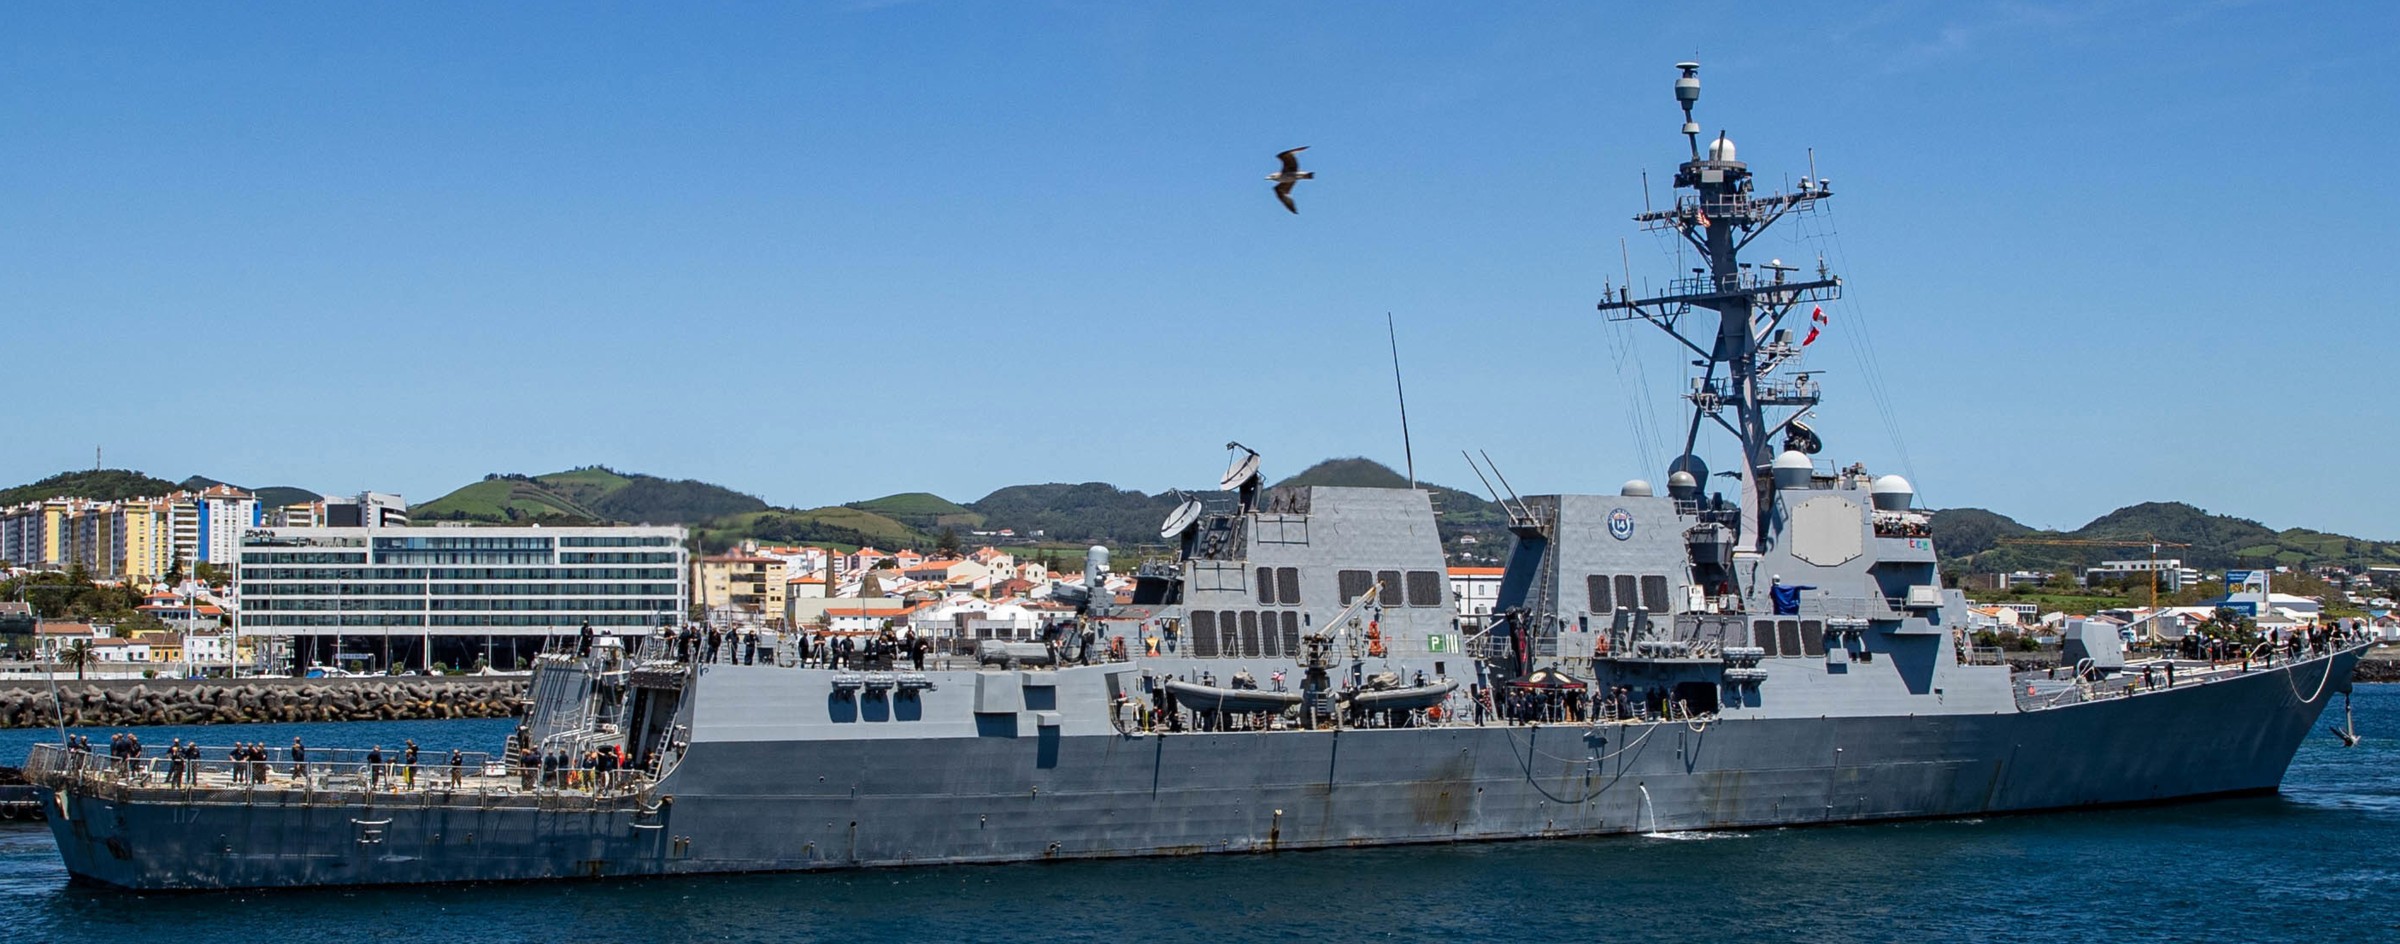 ddg-117 uss paul ignatius arleigh burke class guided missile destroyer aegis us navy azores portugal 43